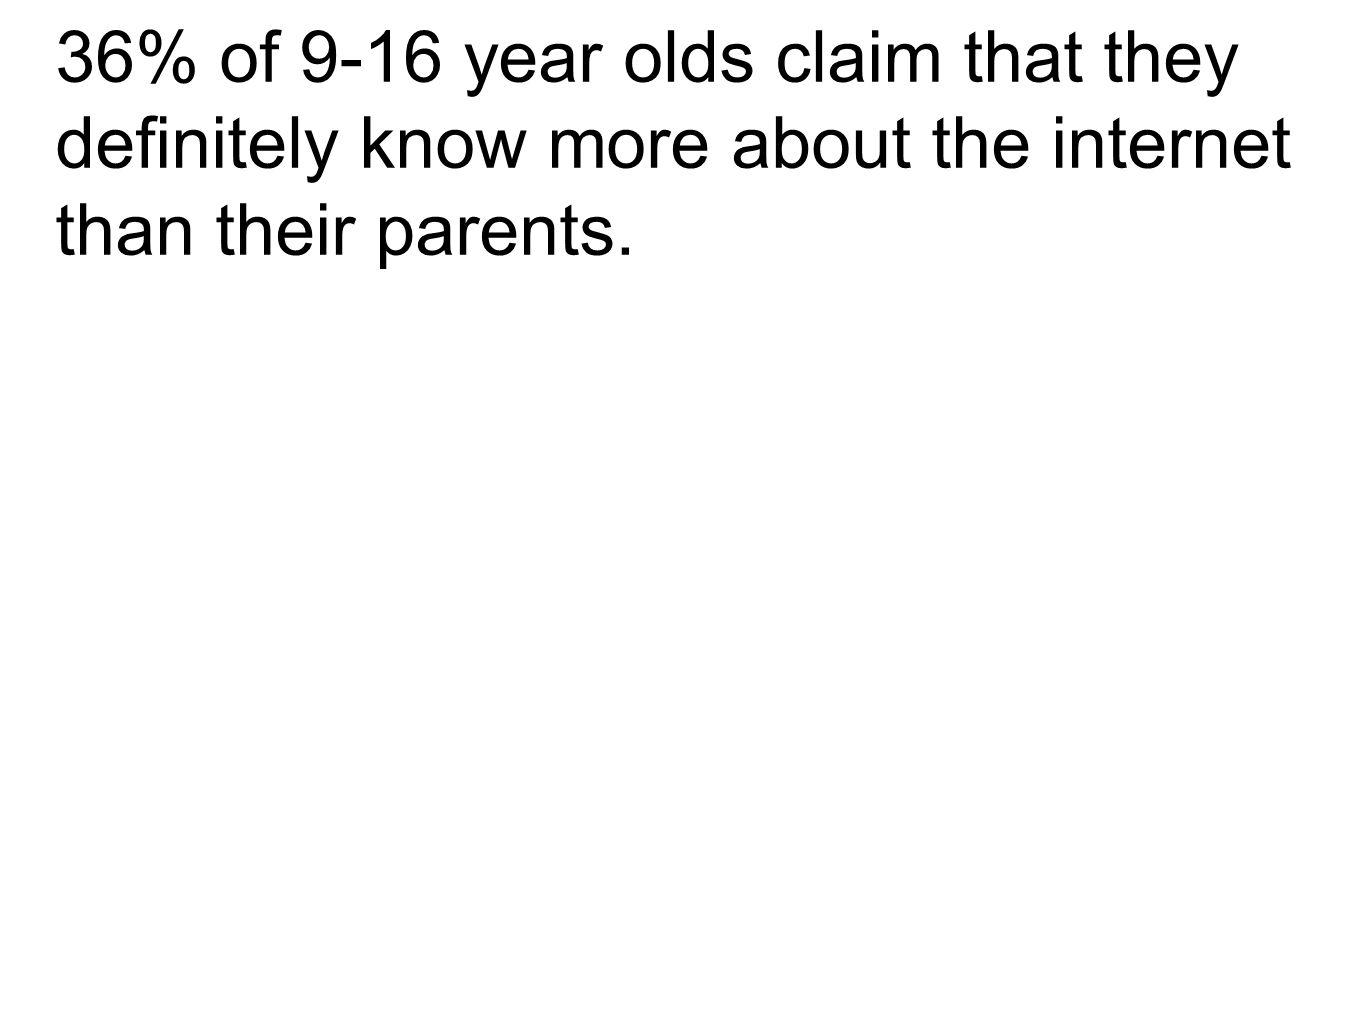 36% of 9-16 year olds claim that they denitely know more about the internet than their parents.